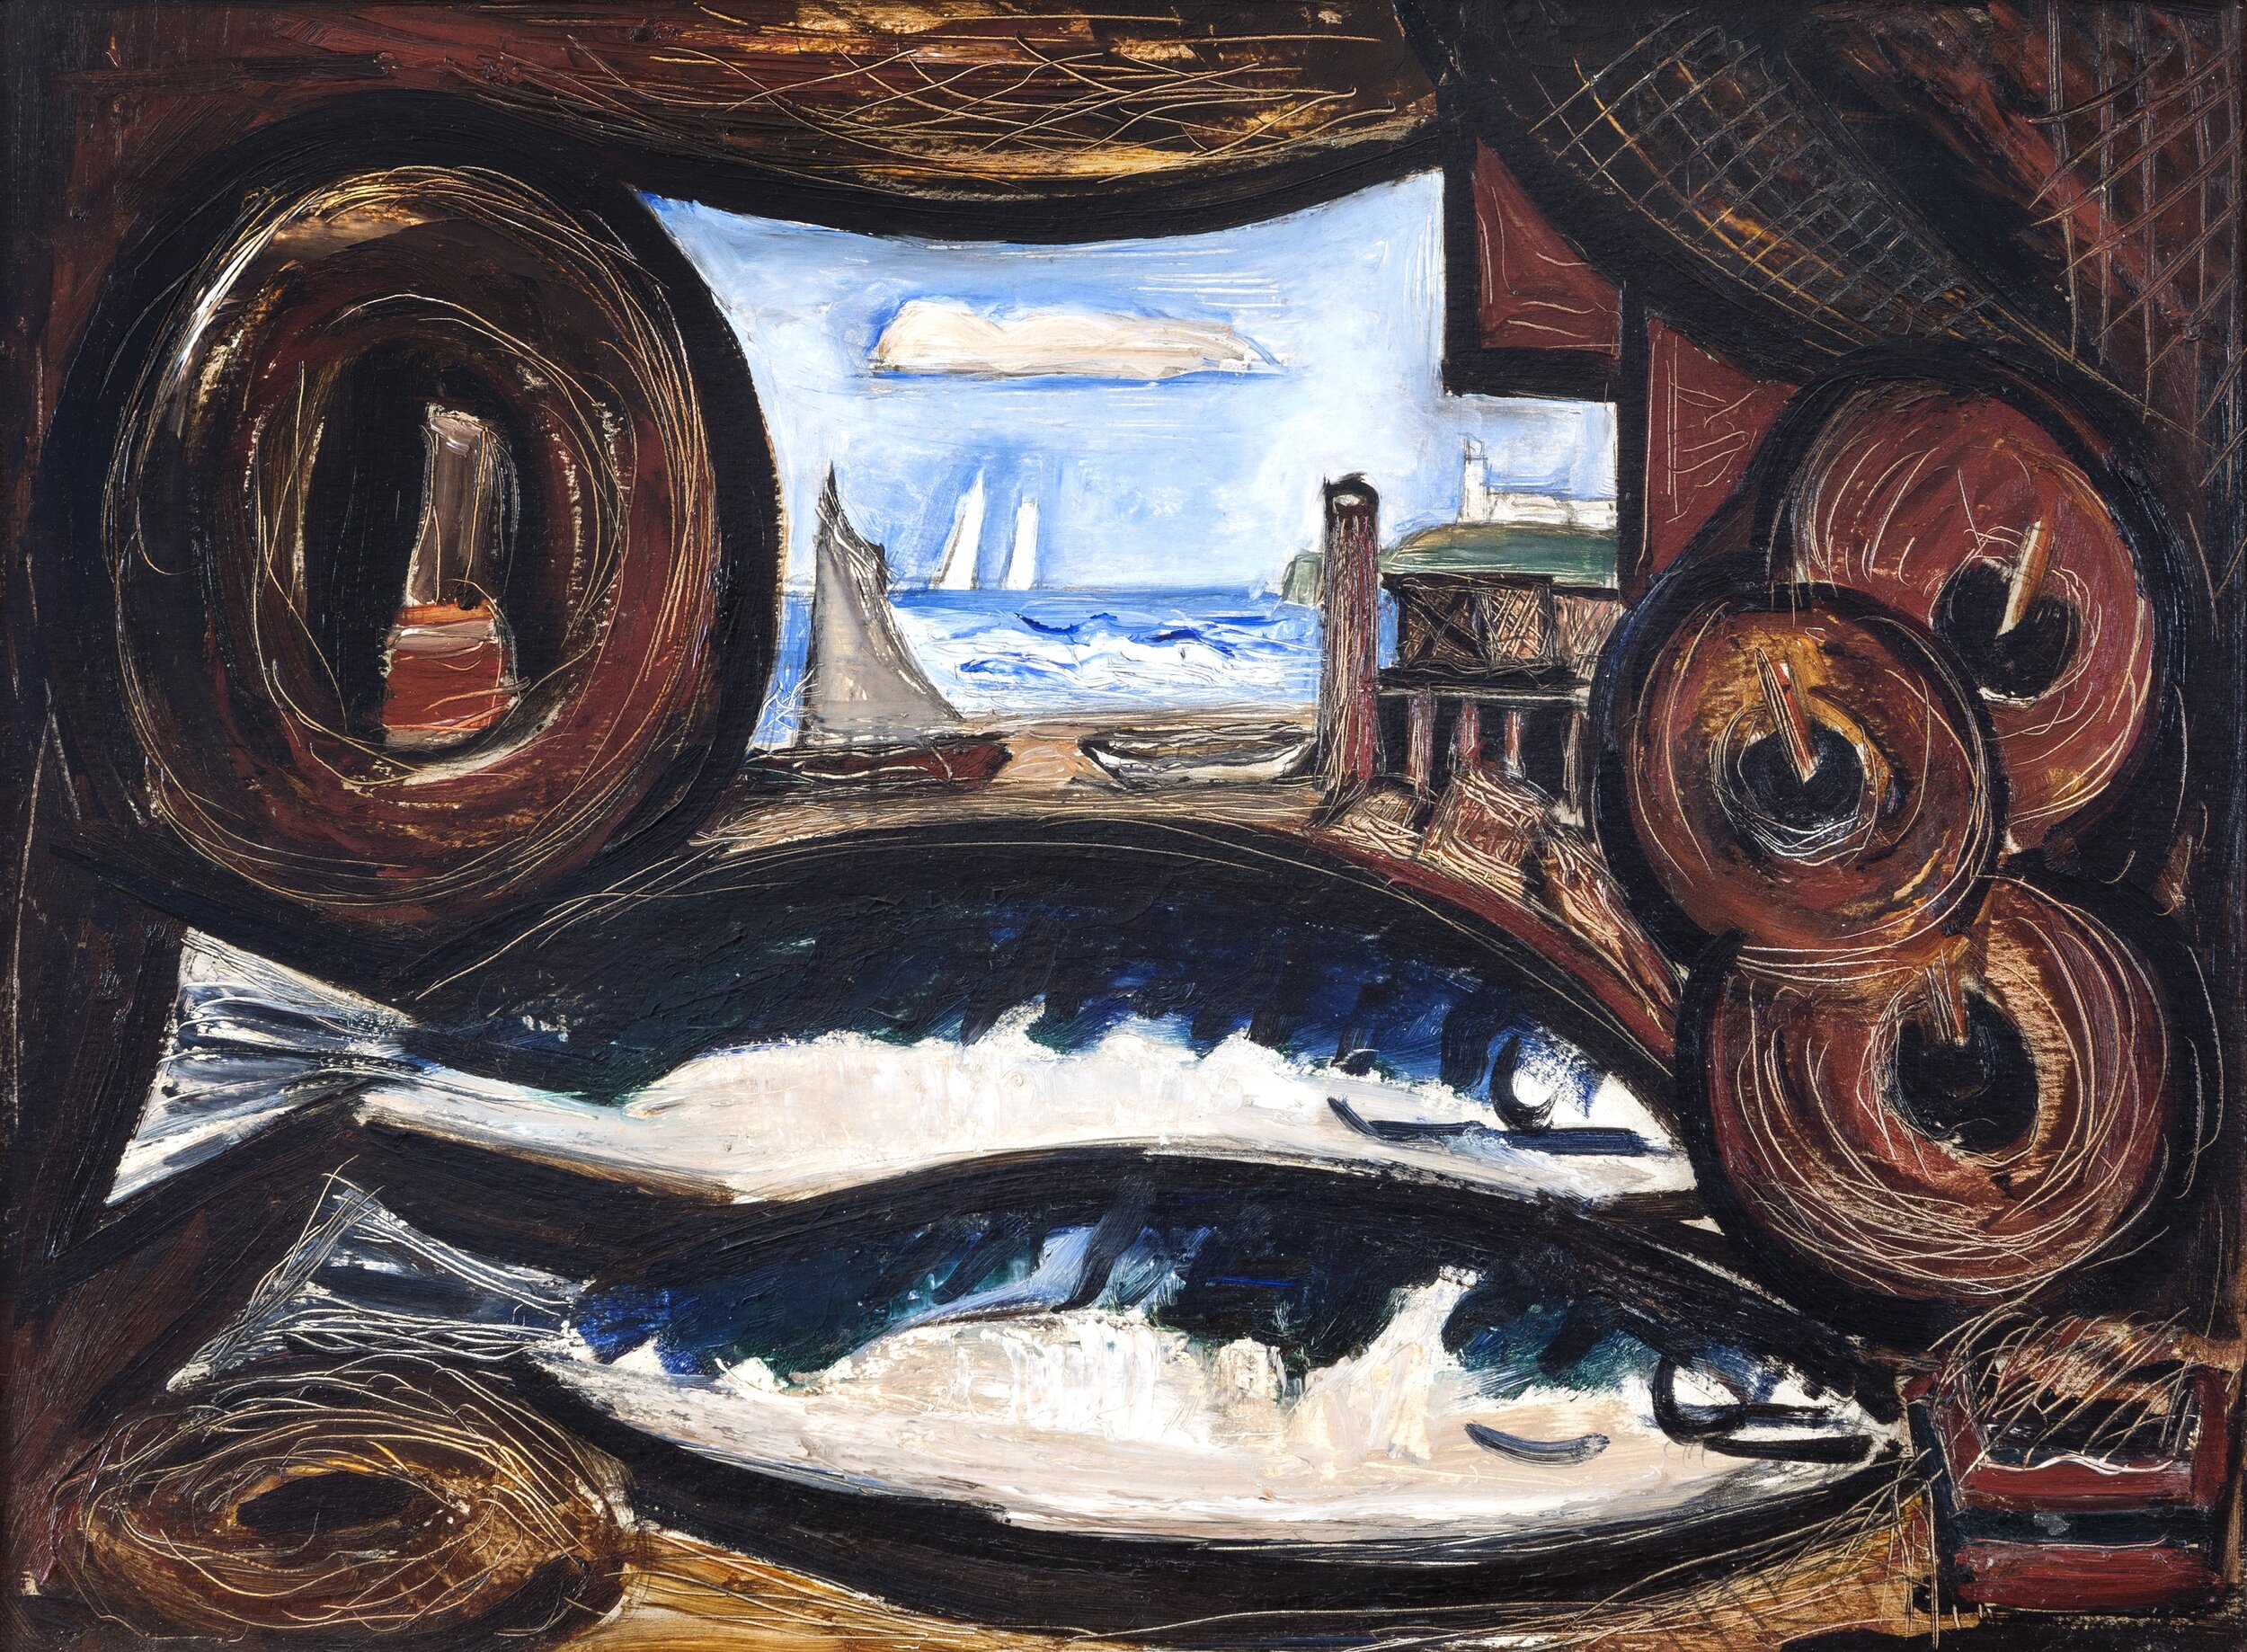 Painting of two fish inside a wooden interior with a window to a seascape with sailboats